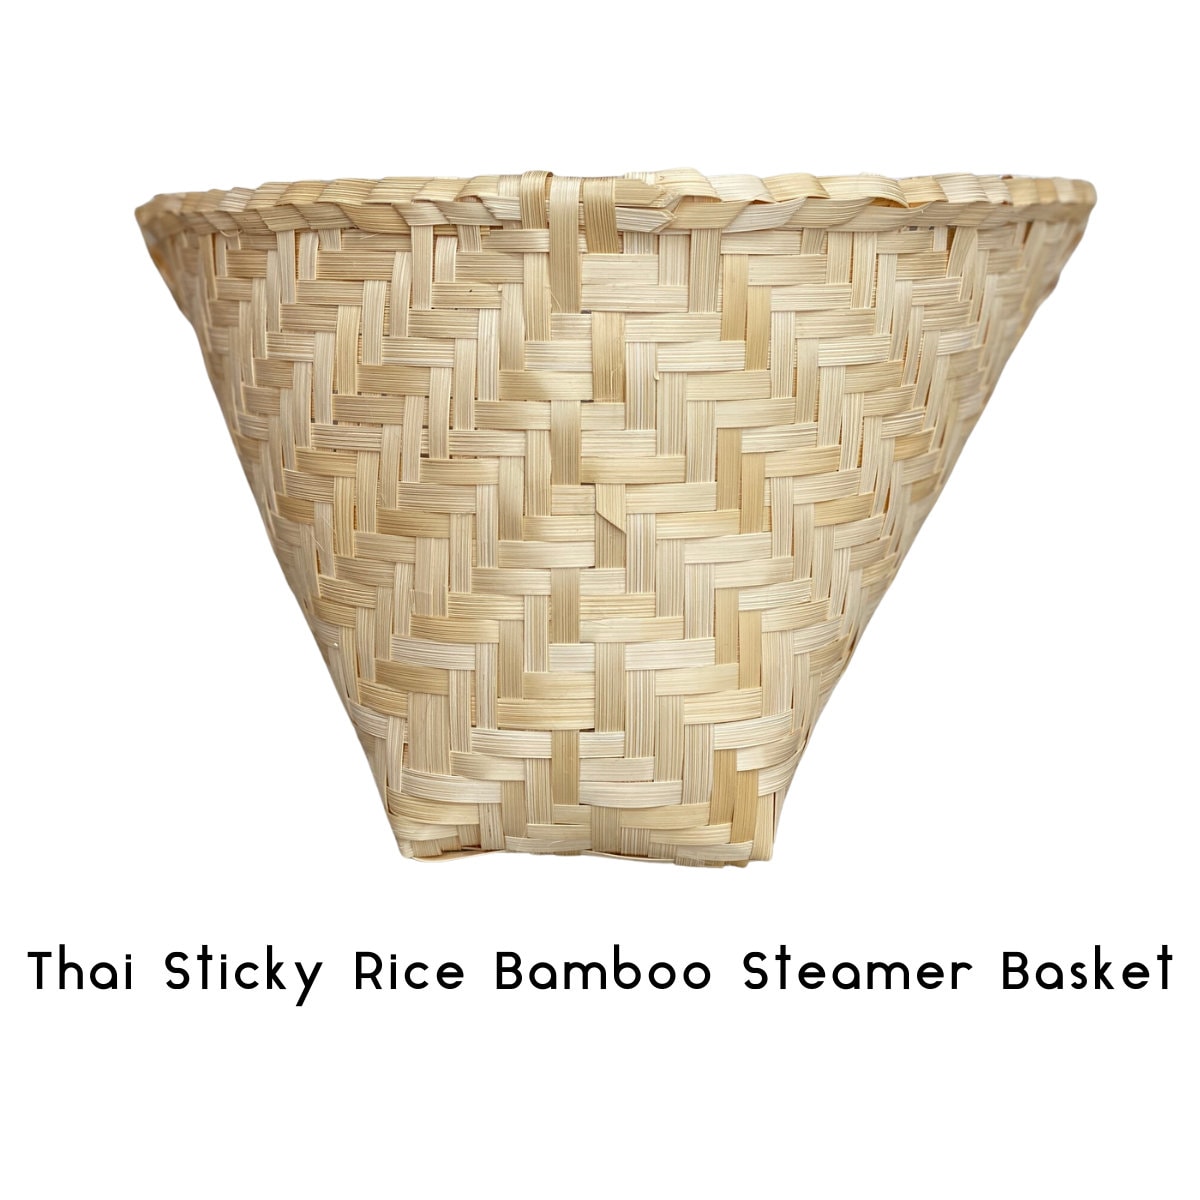 Thai Sticky Rice Steamer Basket: Bamboo Steam Cooker for Authentic